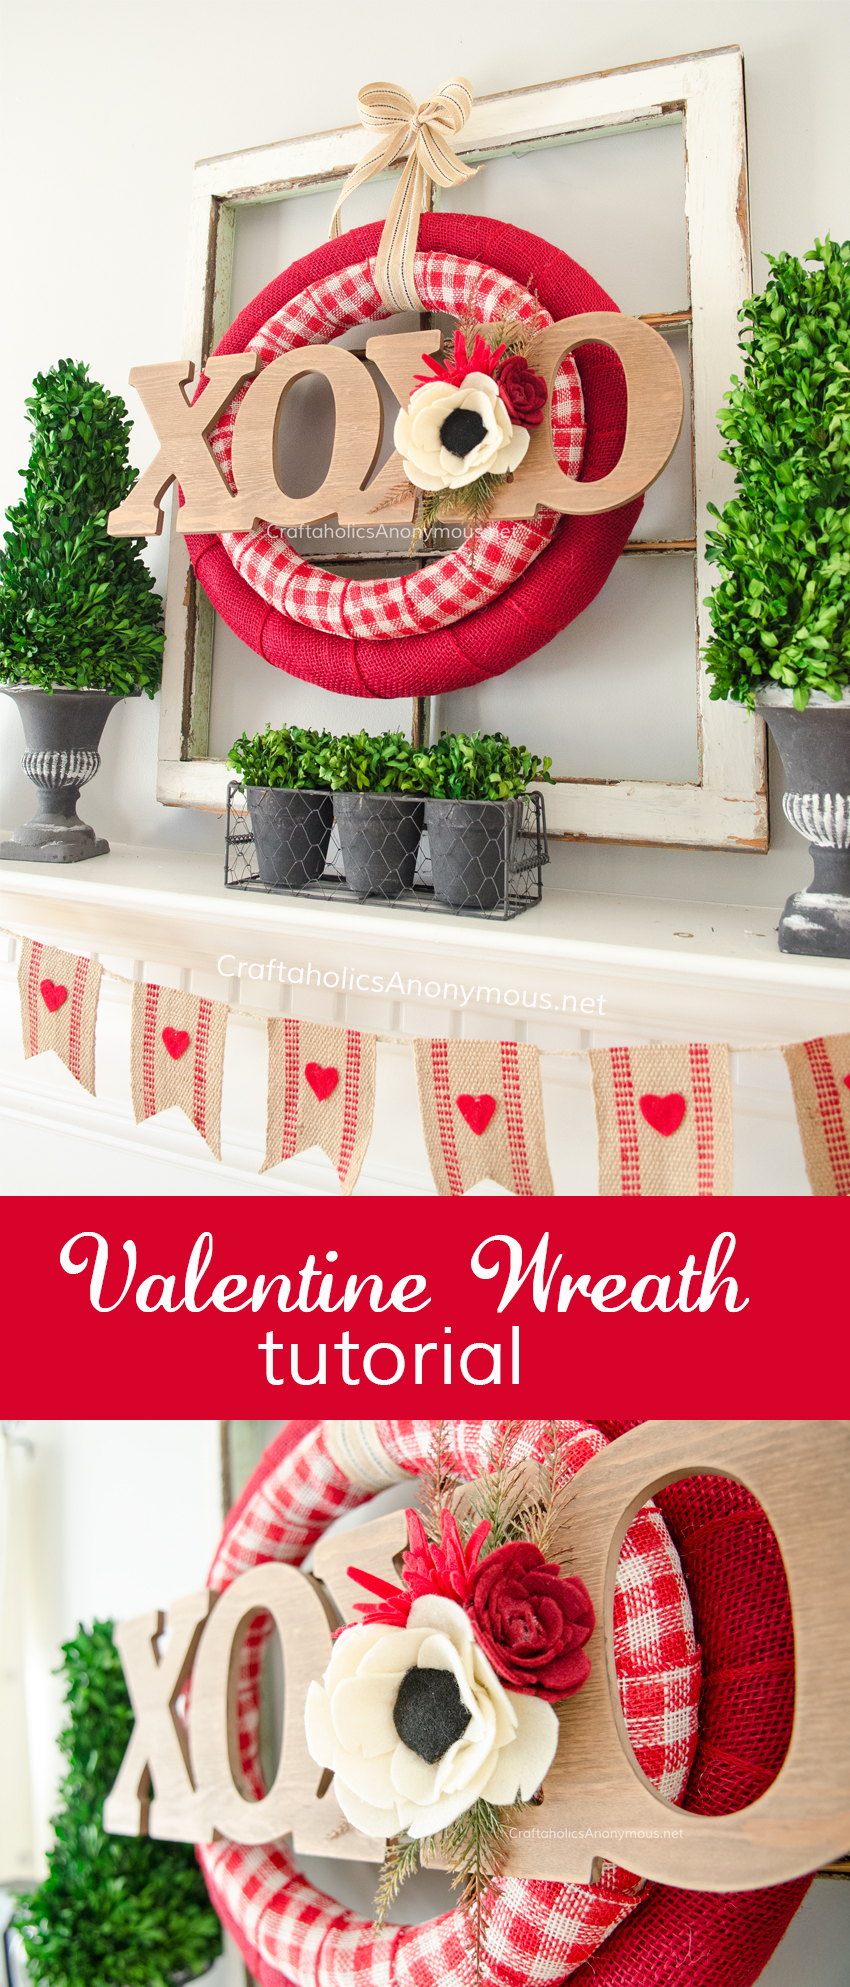 DIY Valentine Wreath tutorial :: Use 2 nesting wreath forms for a layered look! Love this idea.